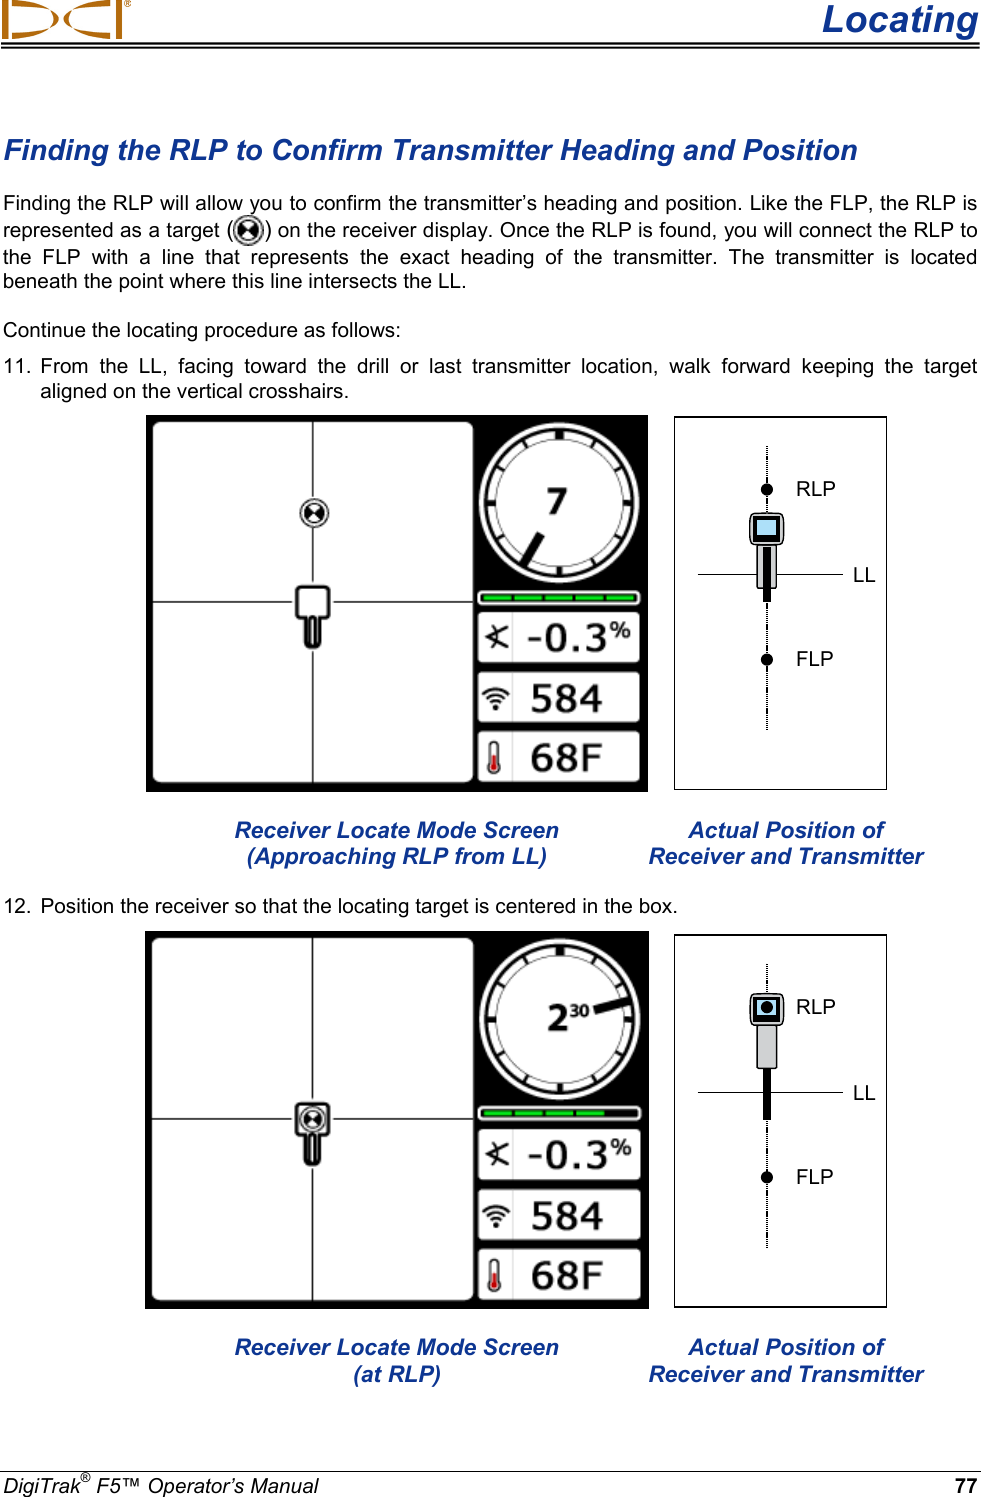  Locating DigiTrak® F5™ Operator’s Manual 77 Finding the RLP to Confirm Transmitter Heading and Position Finding the RLP will allow you to confirm the transmitter’s heading and position. Like the FLP, the RLP is represented as a target ( ) on the receiver display. Once the RLP is found, you will connect the RLP to the FLP with a line that represents the exact heading of the transmitter.  The transmitter is located beneath the point where this line intersects the LL. Continue the locating procedure as follows: 11. From the LL, facing toward the drill or last transmitter location, walk forward keeping the target aligned on the vertical crosshairs.    RLPFLPLL Receiver Locate Mode Screen  (Approaching RLP from LL) Actual Position of Receiver and Transmitter 12. Position the receiver so that the locating target is centered in the box.     RLPFLPLL Receiver Locate Mode Screen  (at RLP) Actual Position of Receiver and Transmitter 